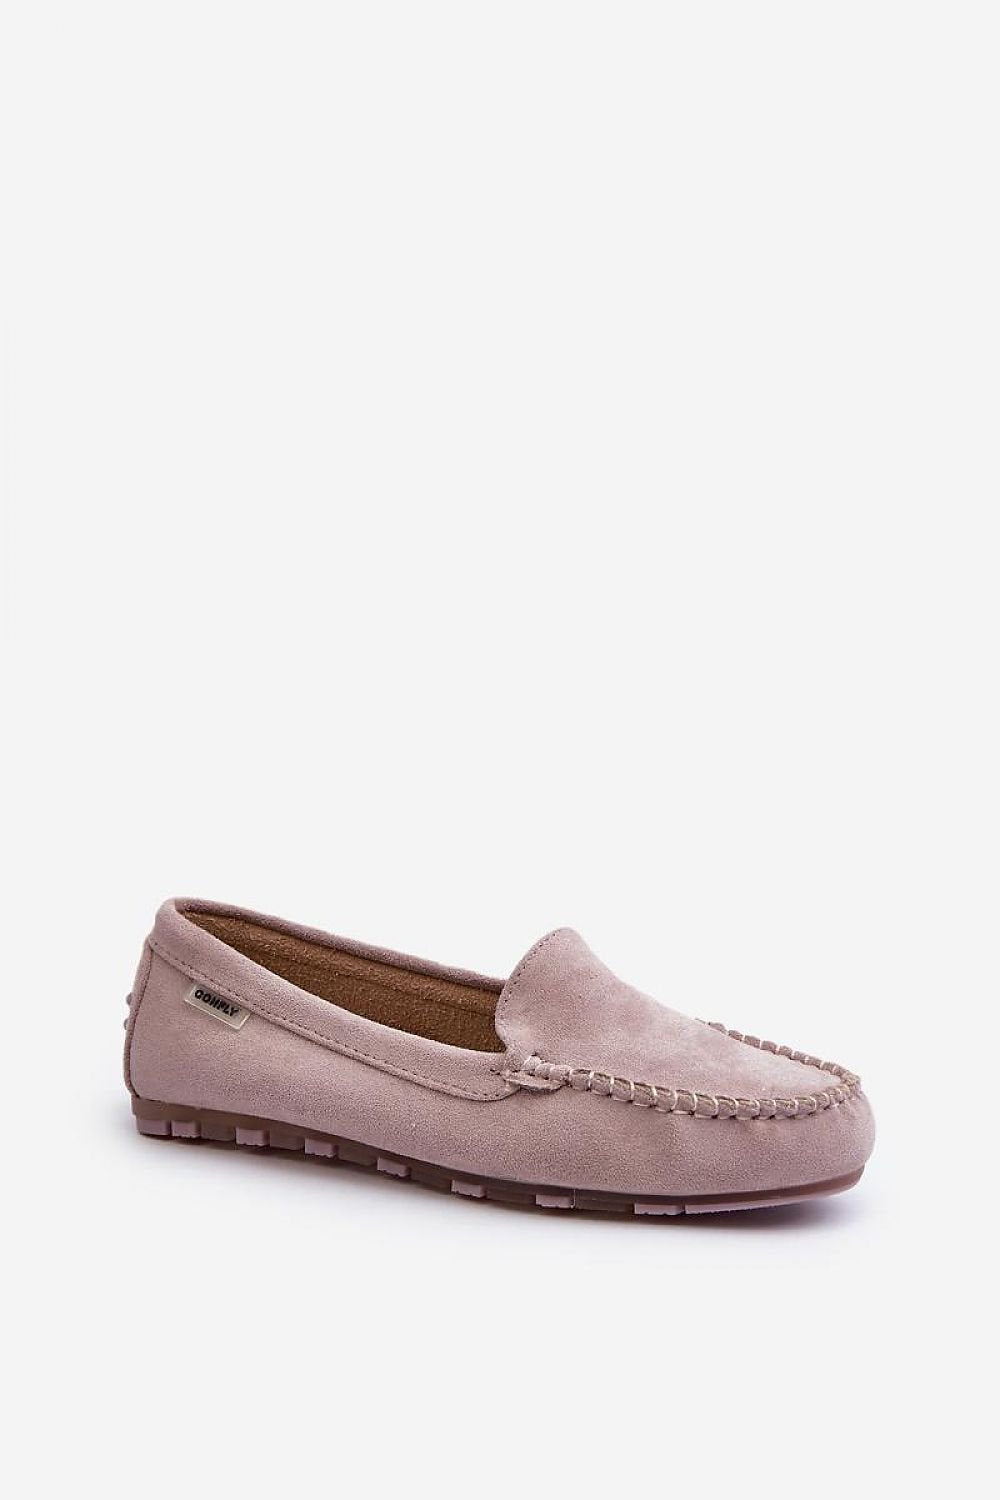 TEEK - Soft Smooth Top Mocassin Loafers SHOES TEEK MH violet 6.5 